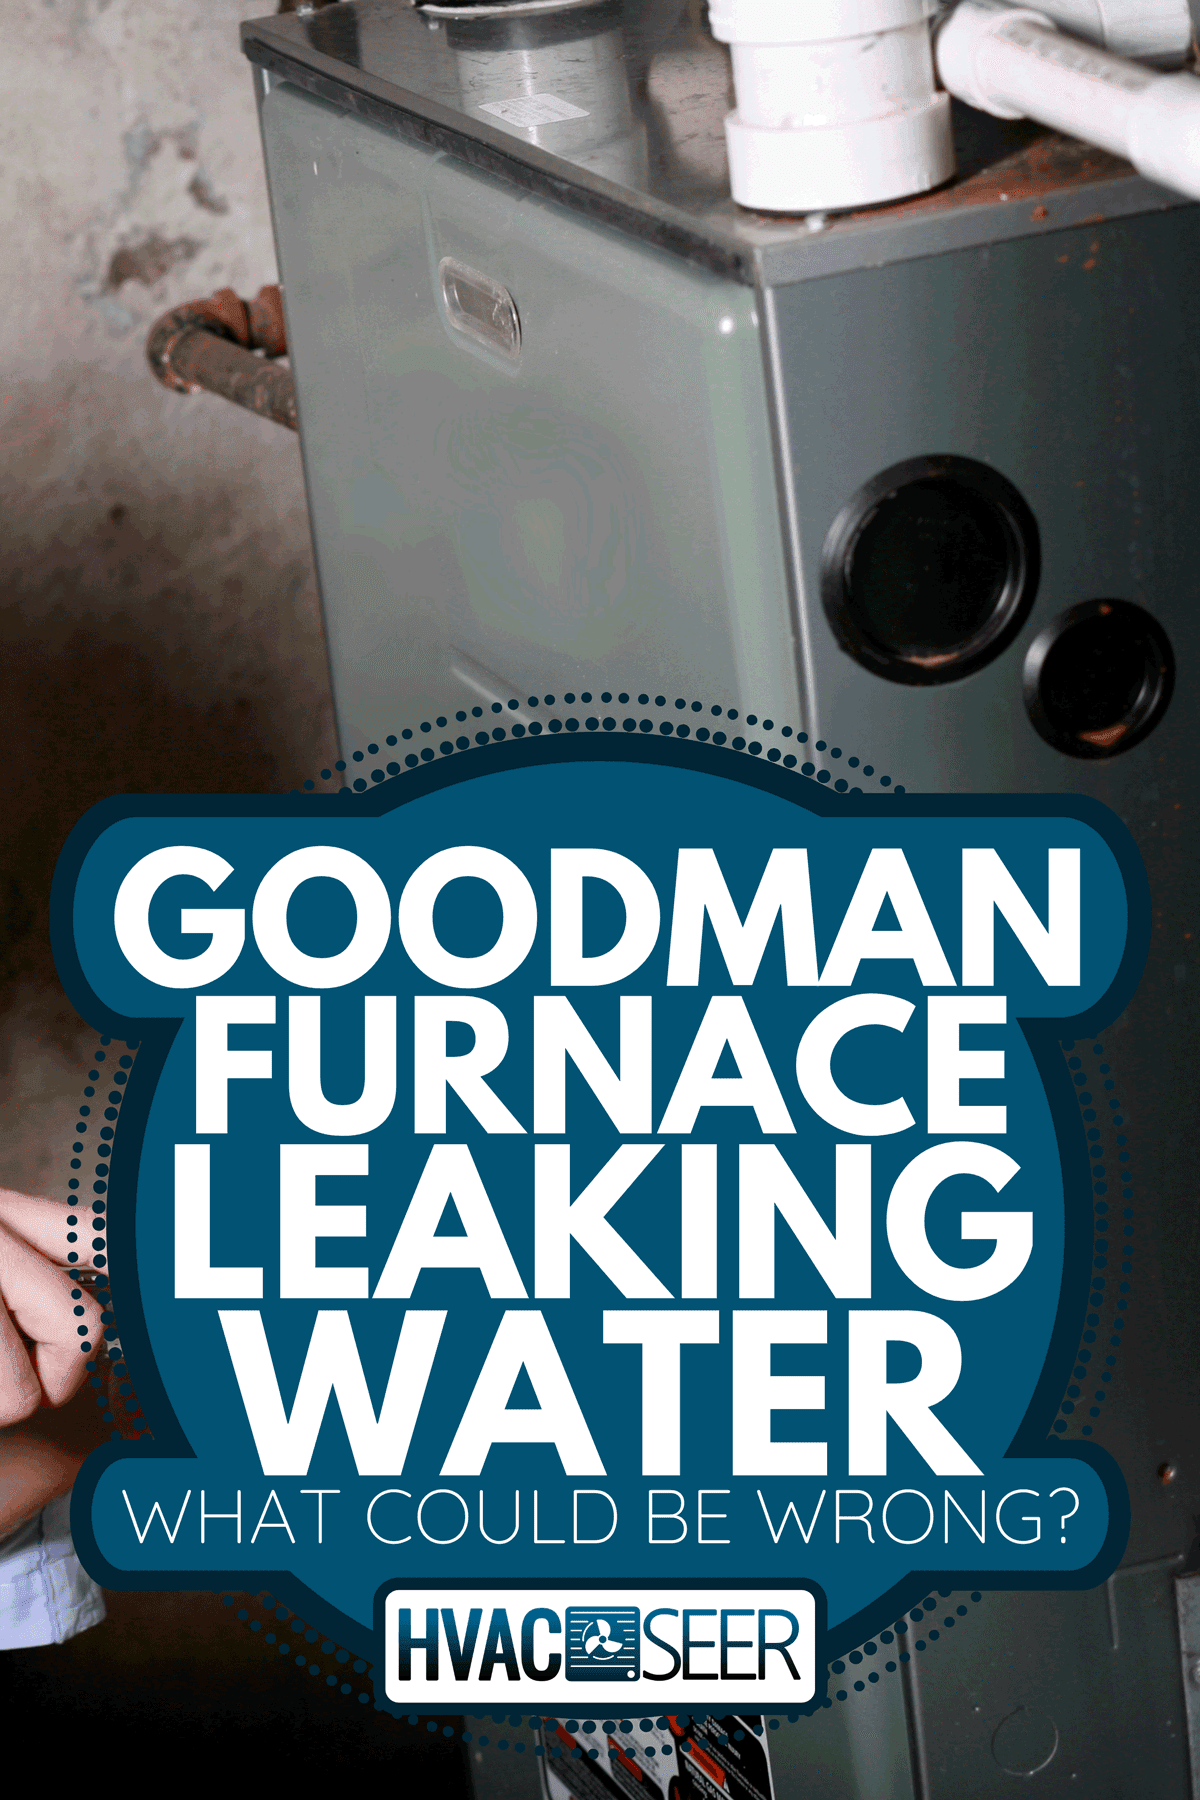 A service man working on furnace, Goodman Furnace Leaking Water - What Could Be Wrong?